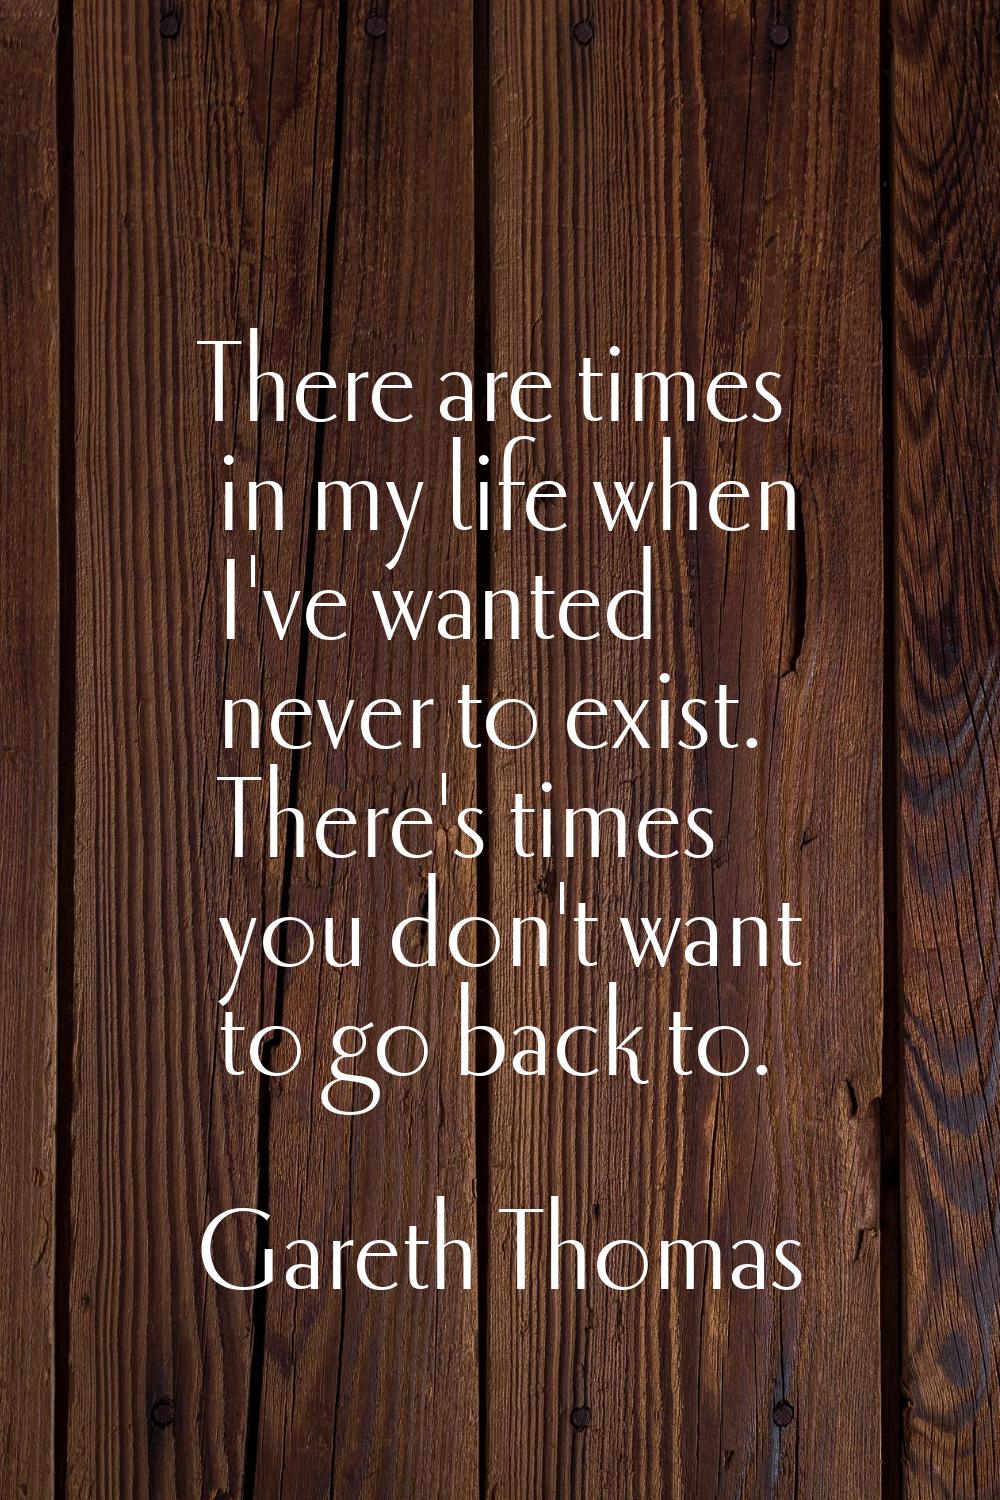 There are times in my life when I've wanted never to exist. There's times you don't want to go back